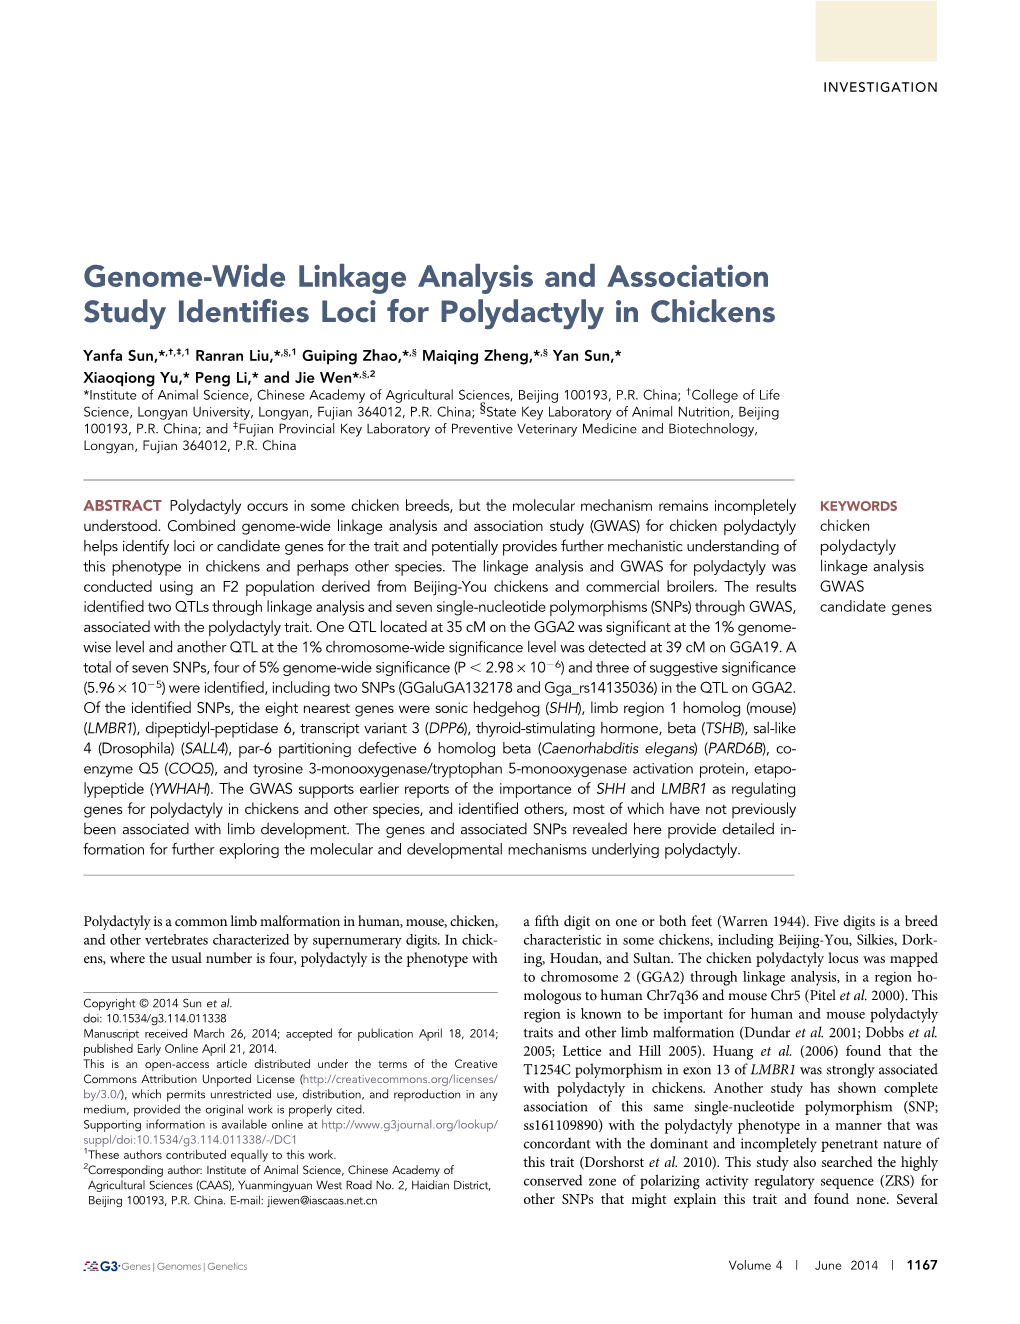 Genome-Wide Linkage Analysis and Association Study Identifies Loci For